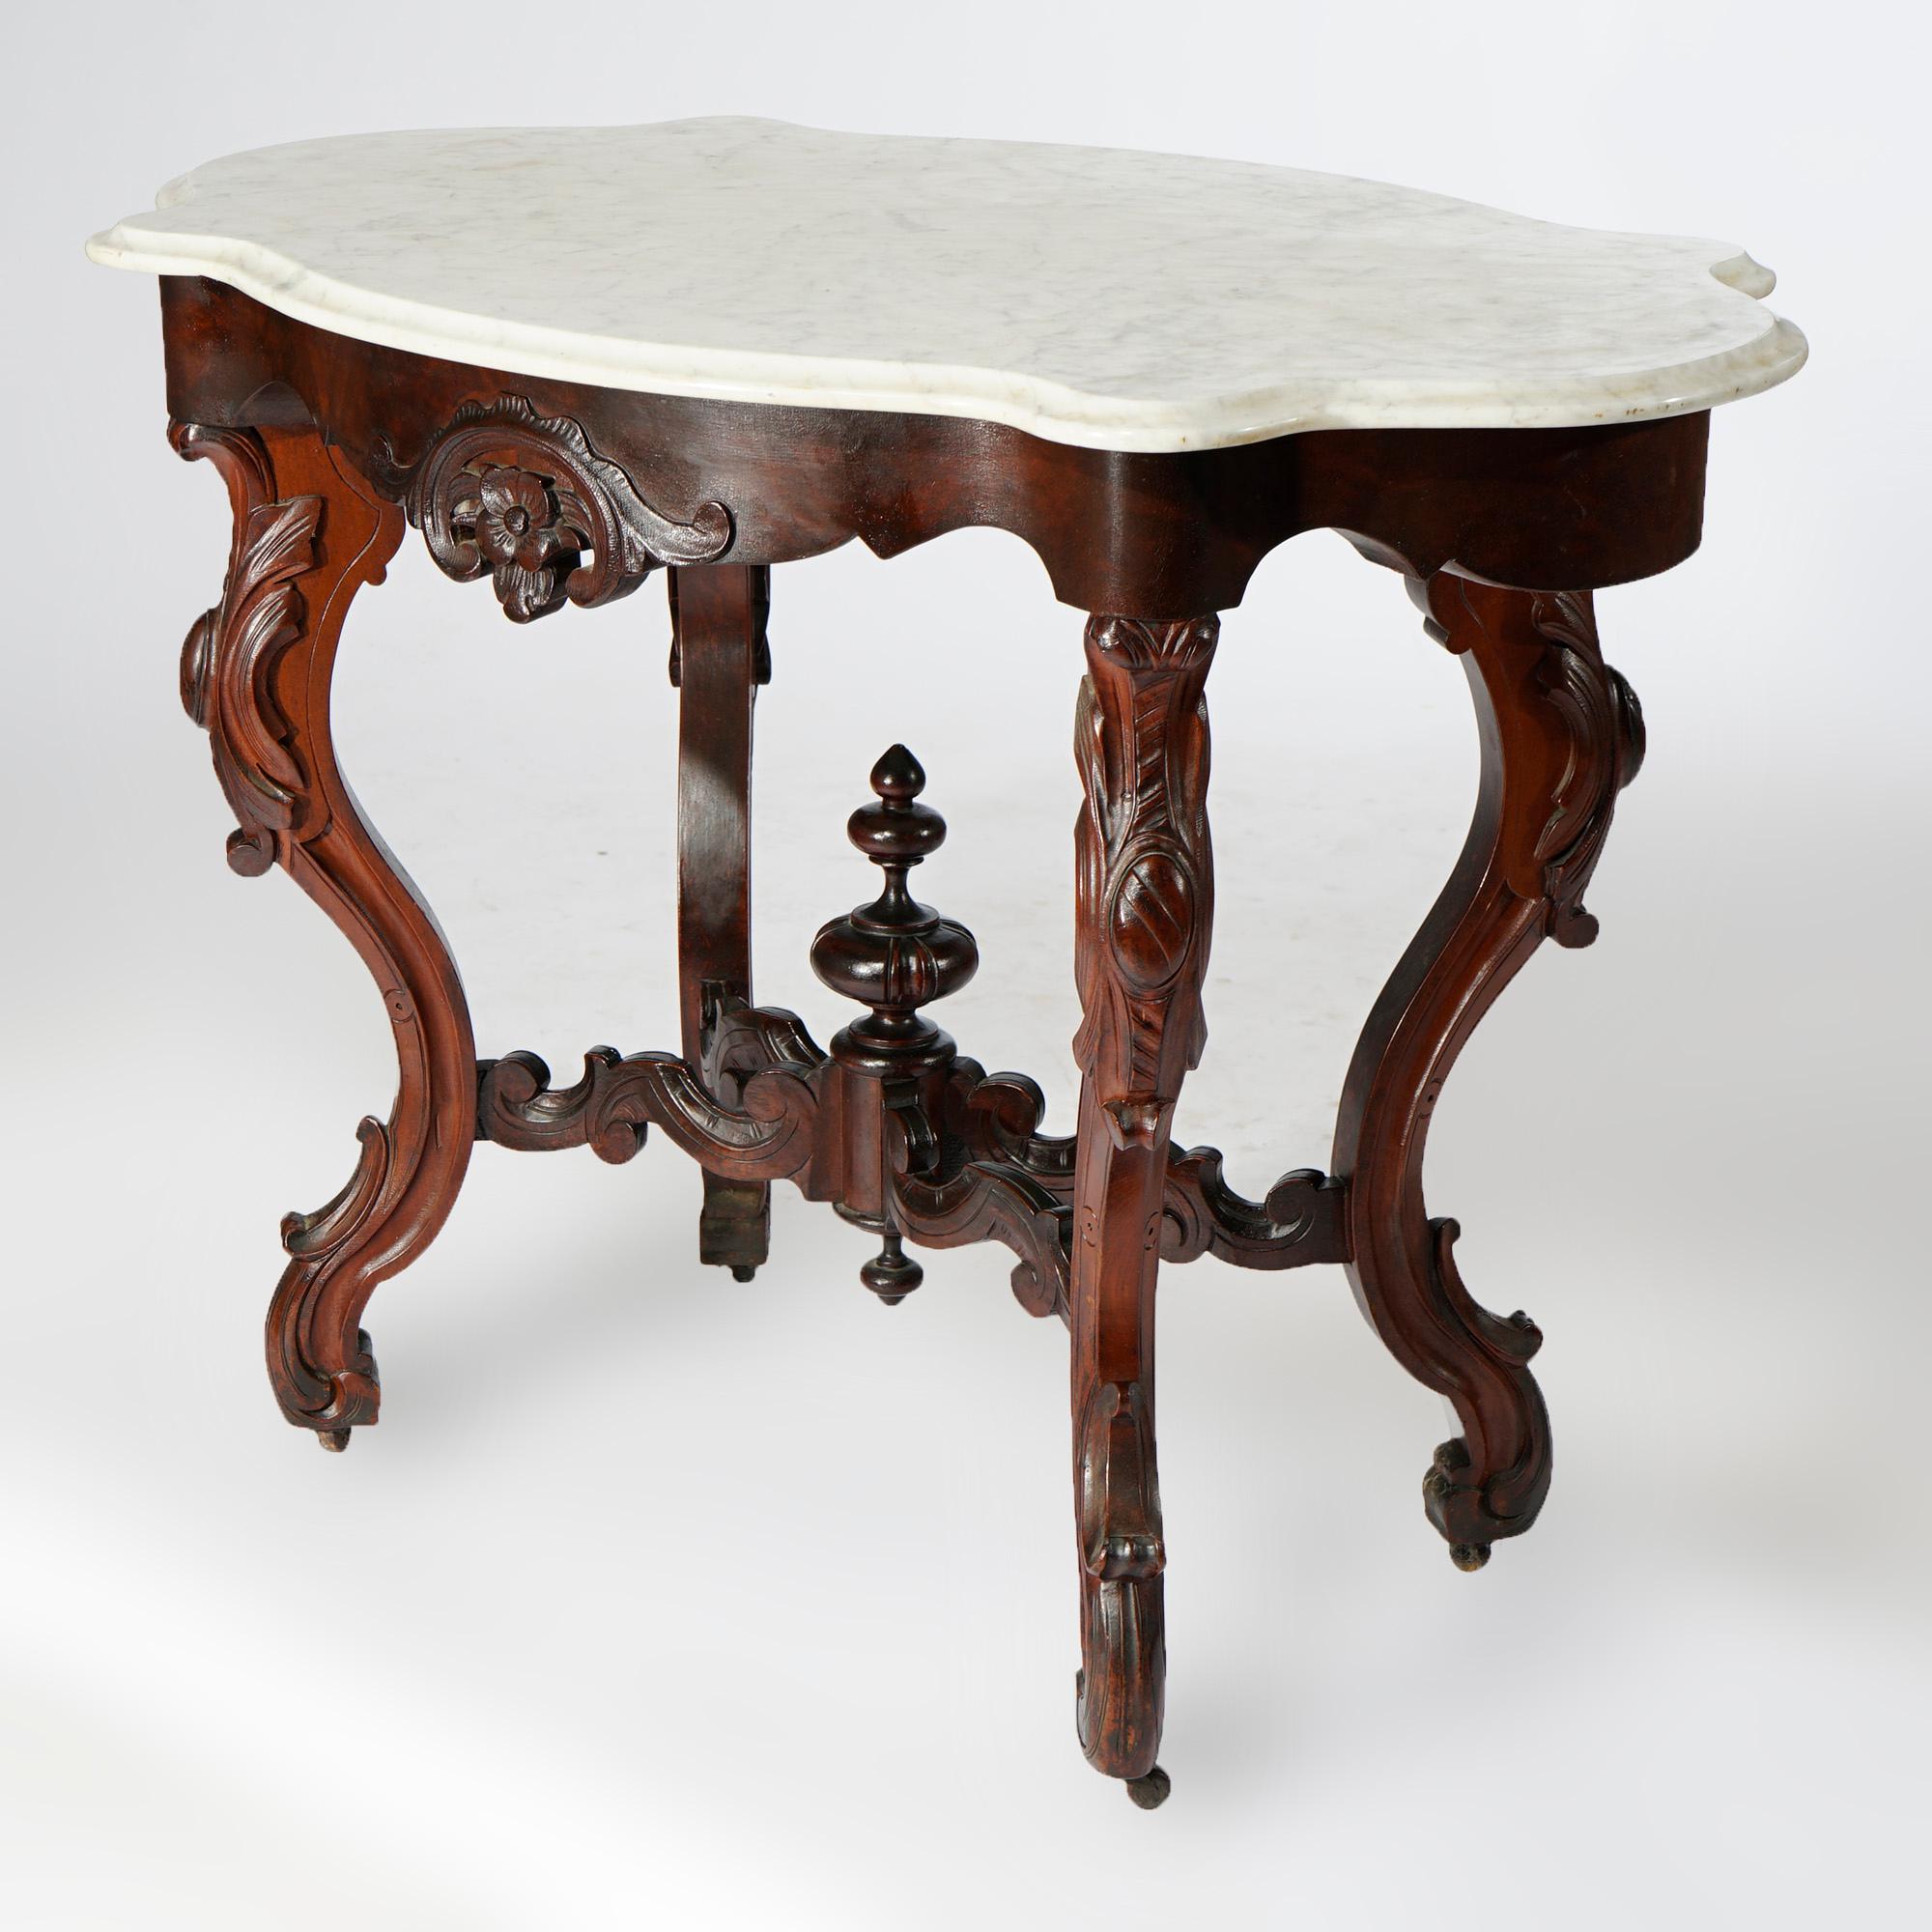 Antique Renaissance Revival Walnut, Rosewood & Marble Parlor Table c1890 In Good Condition For Sale In Big Flats, NY